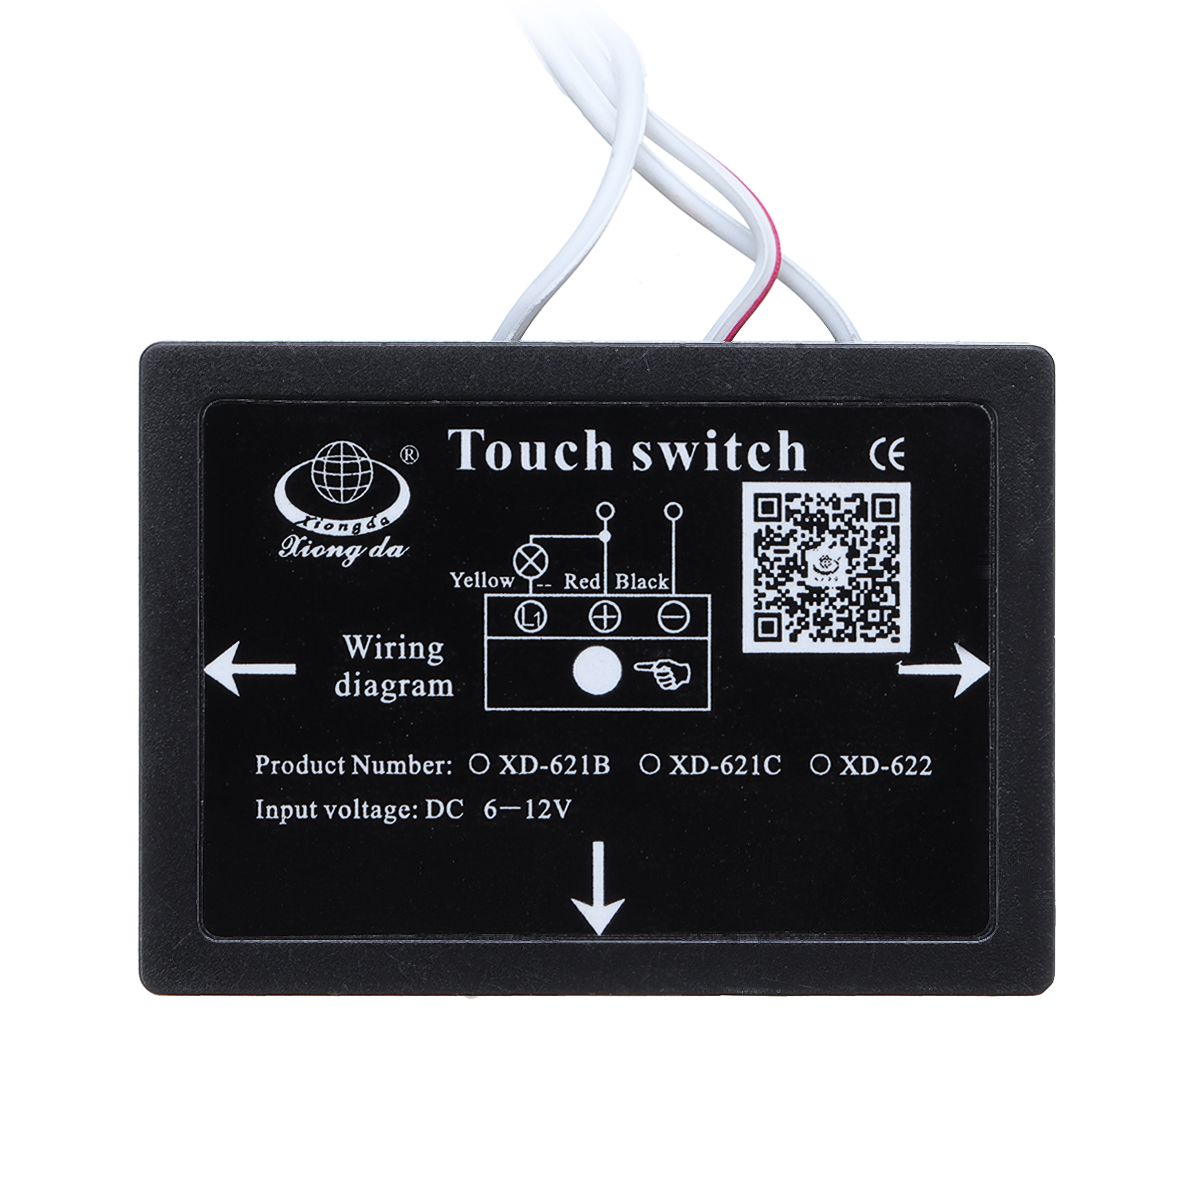 AC170-240V-Isolated-Touch-Light-Switch-for-Bathroom-Mirror-Energy-Saving-LED-Light-Lamp-1399338